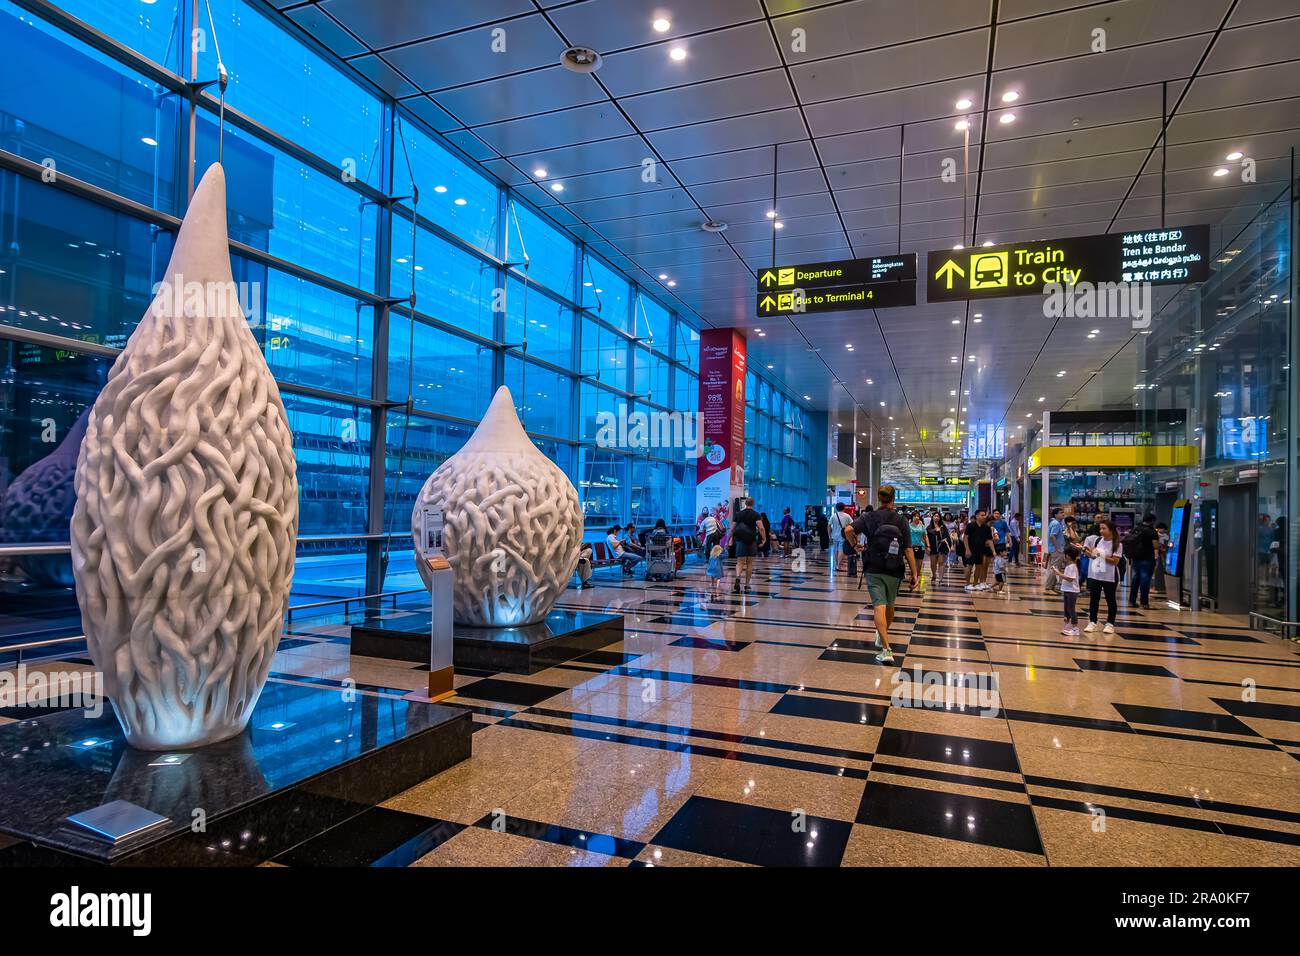 Arriving at Terminal 3 via Link way or Skytrain in Changi Airport, Singapore. Stock Photo